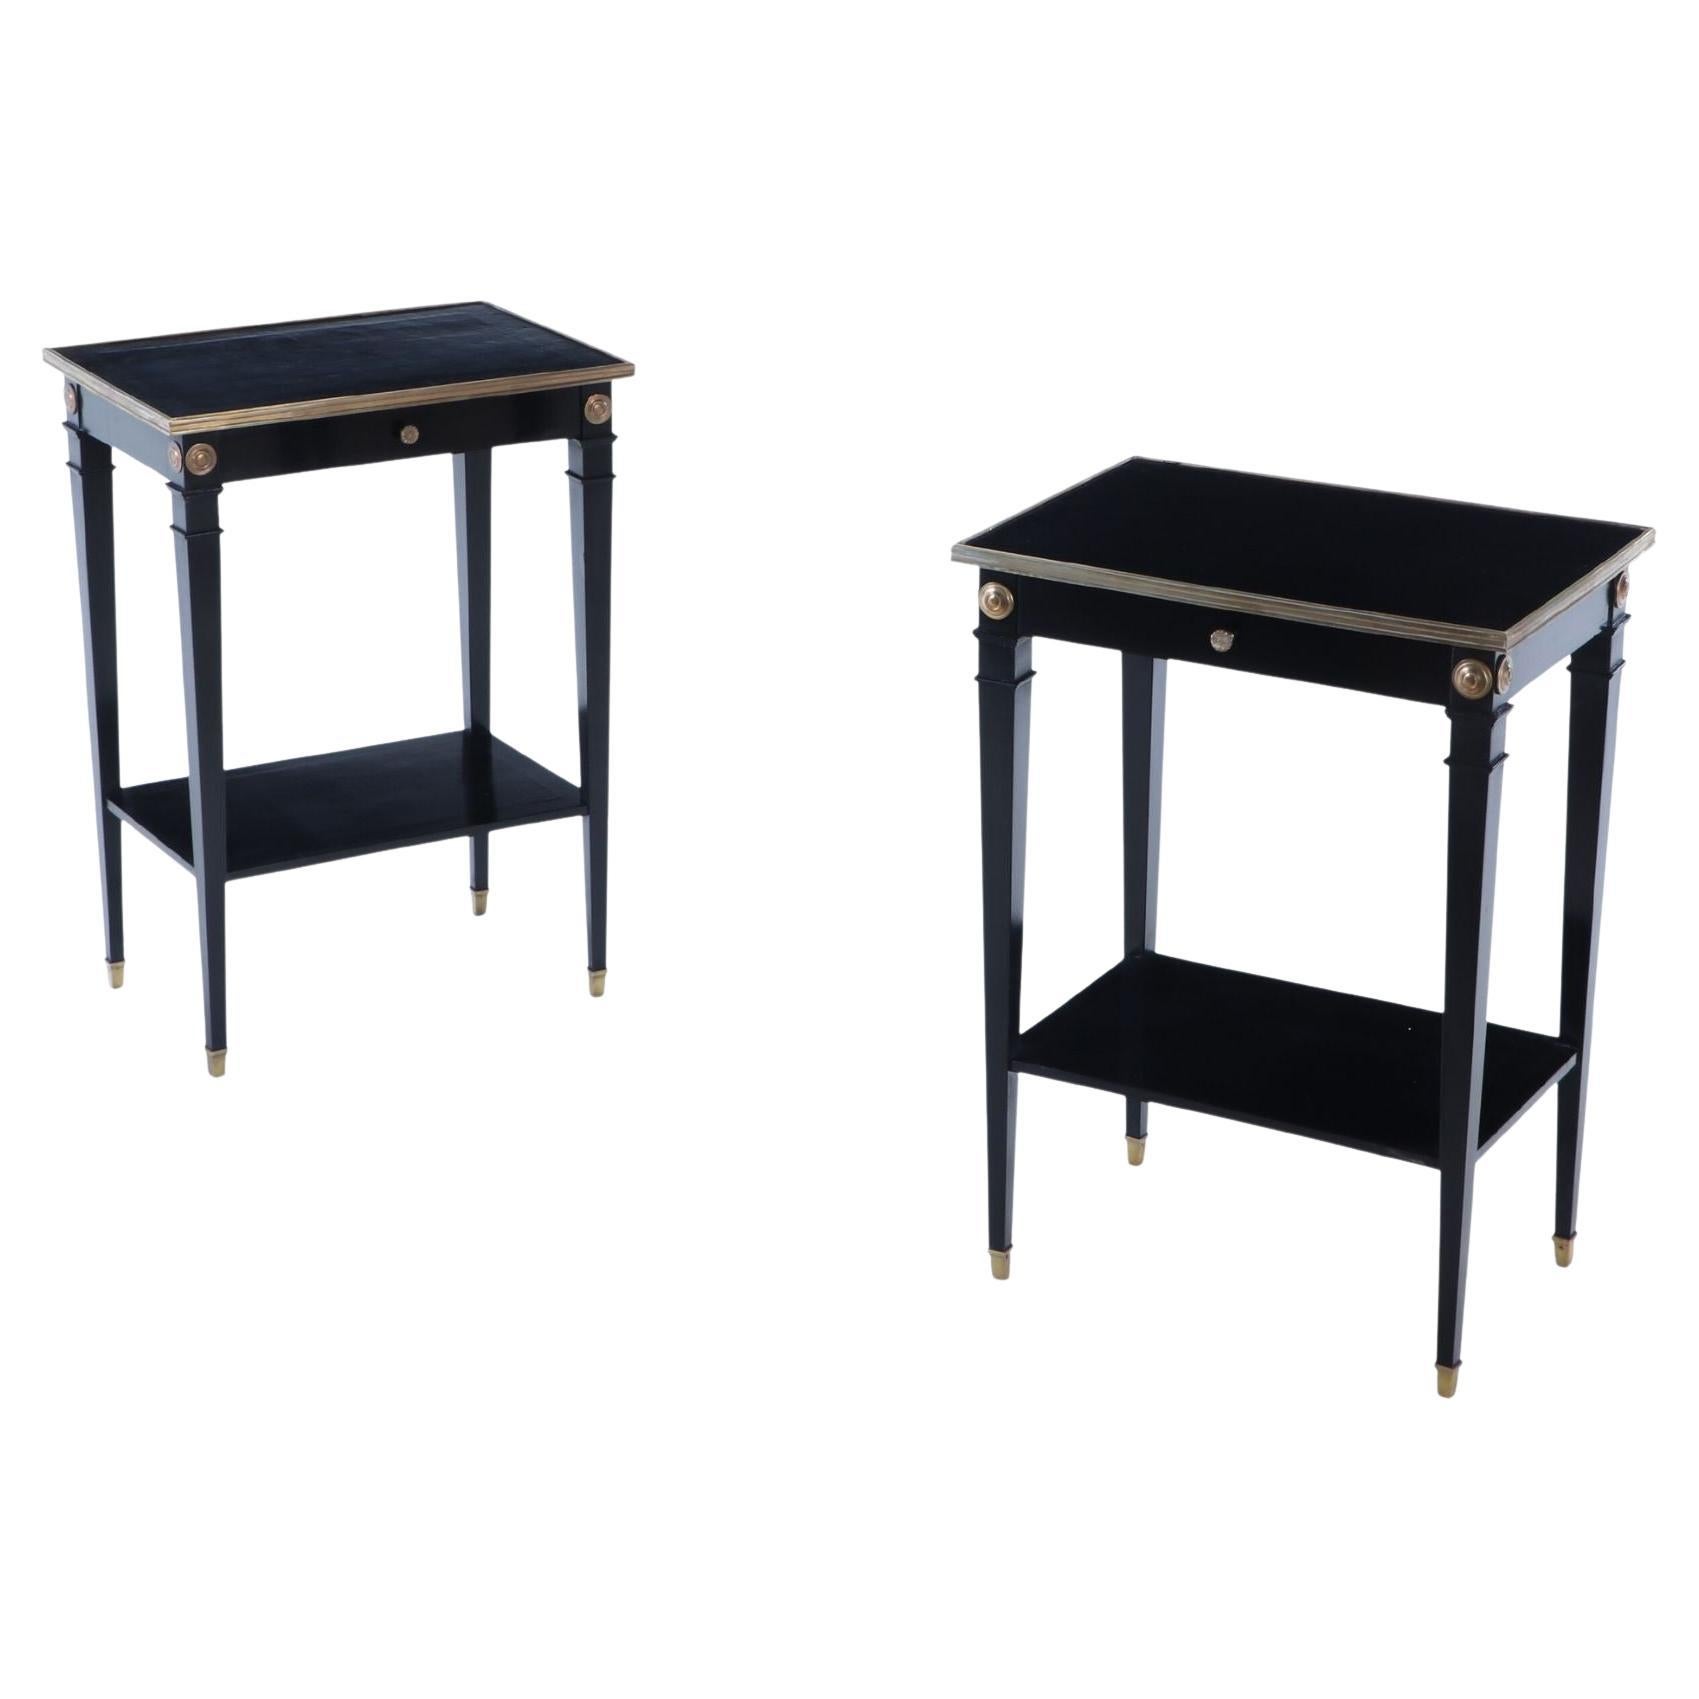 Pair of ebonized mahogany and bronze mounted tables Attrb to Jansen